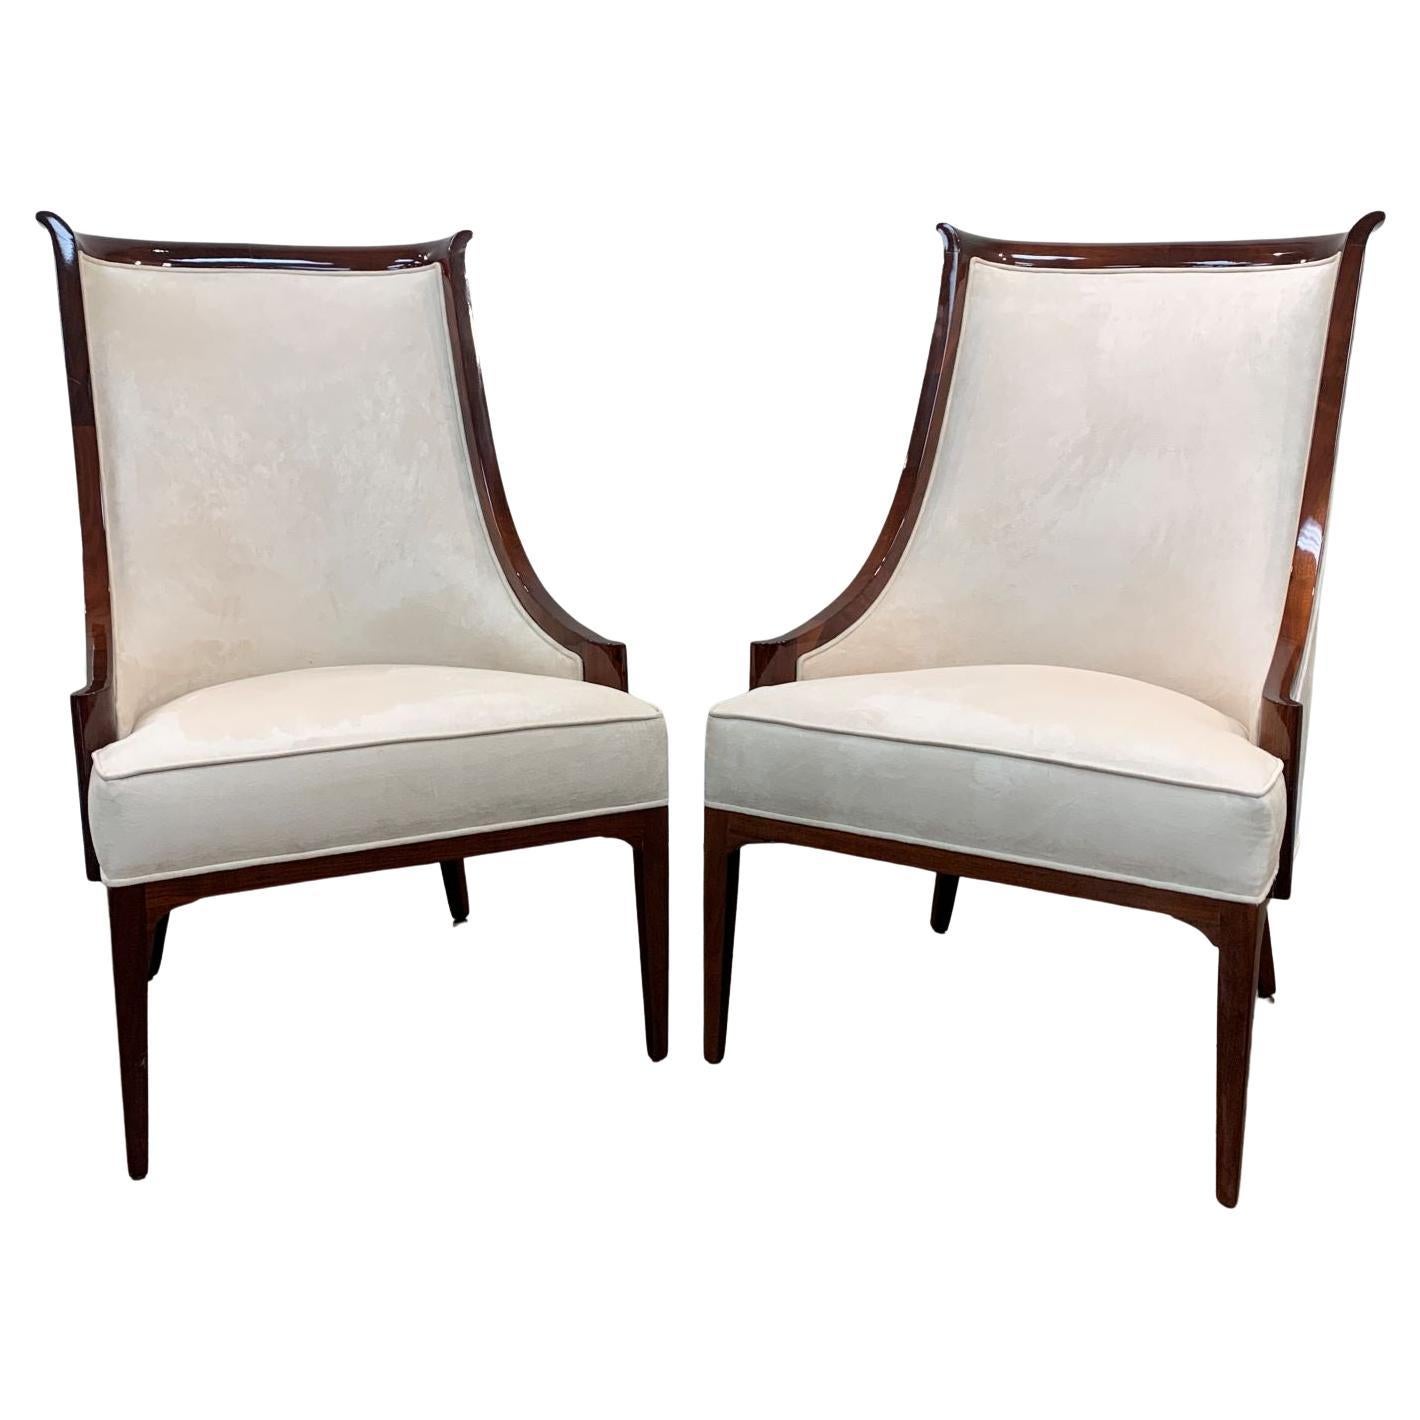 Pair of tall sculptural American Mid-Century Modern lounge chairs. Elegantly restored and handcrafted solid walnut in a gloss finish perfectly complimented with soft, cream ultra-suede upholstery. Measures: Height 37.5, width 24.5, depth 28, seat